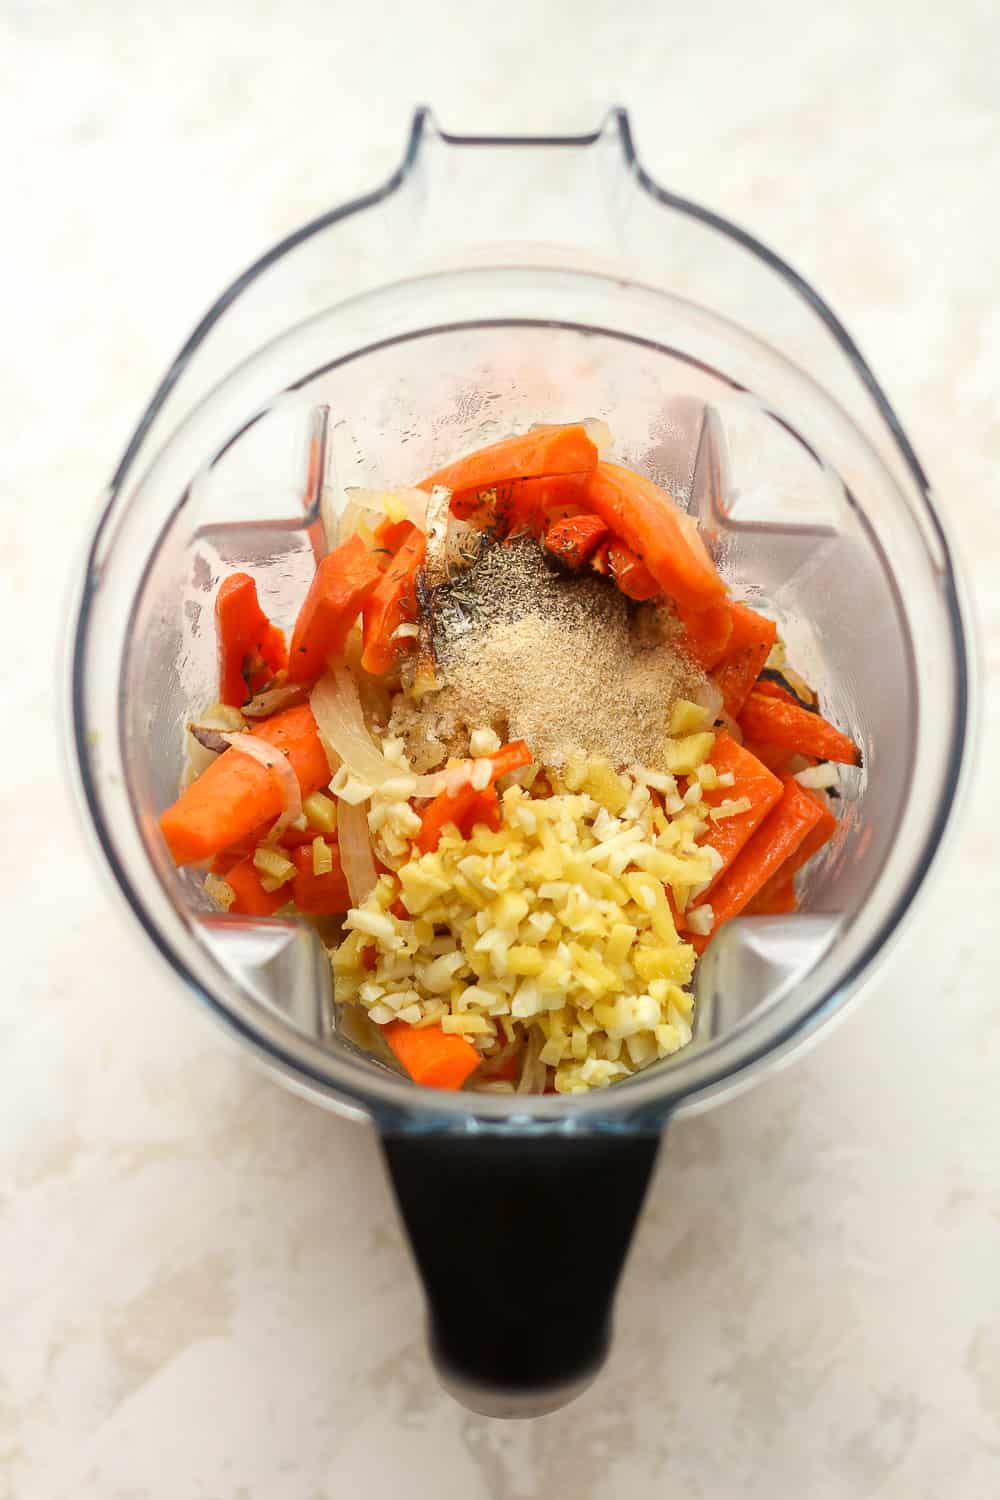 A blender with the roasted carrots plus ginger, garlic, and seasoning on top.